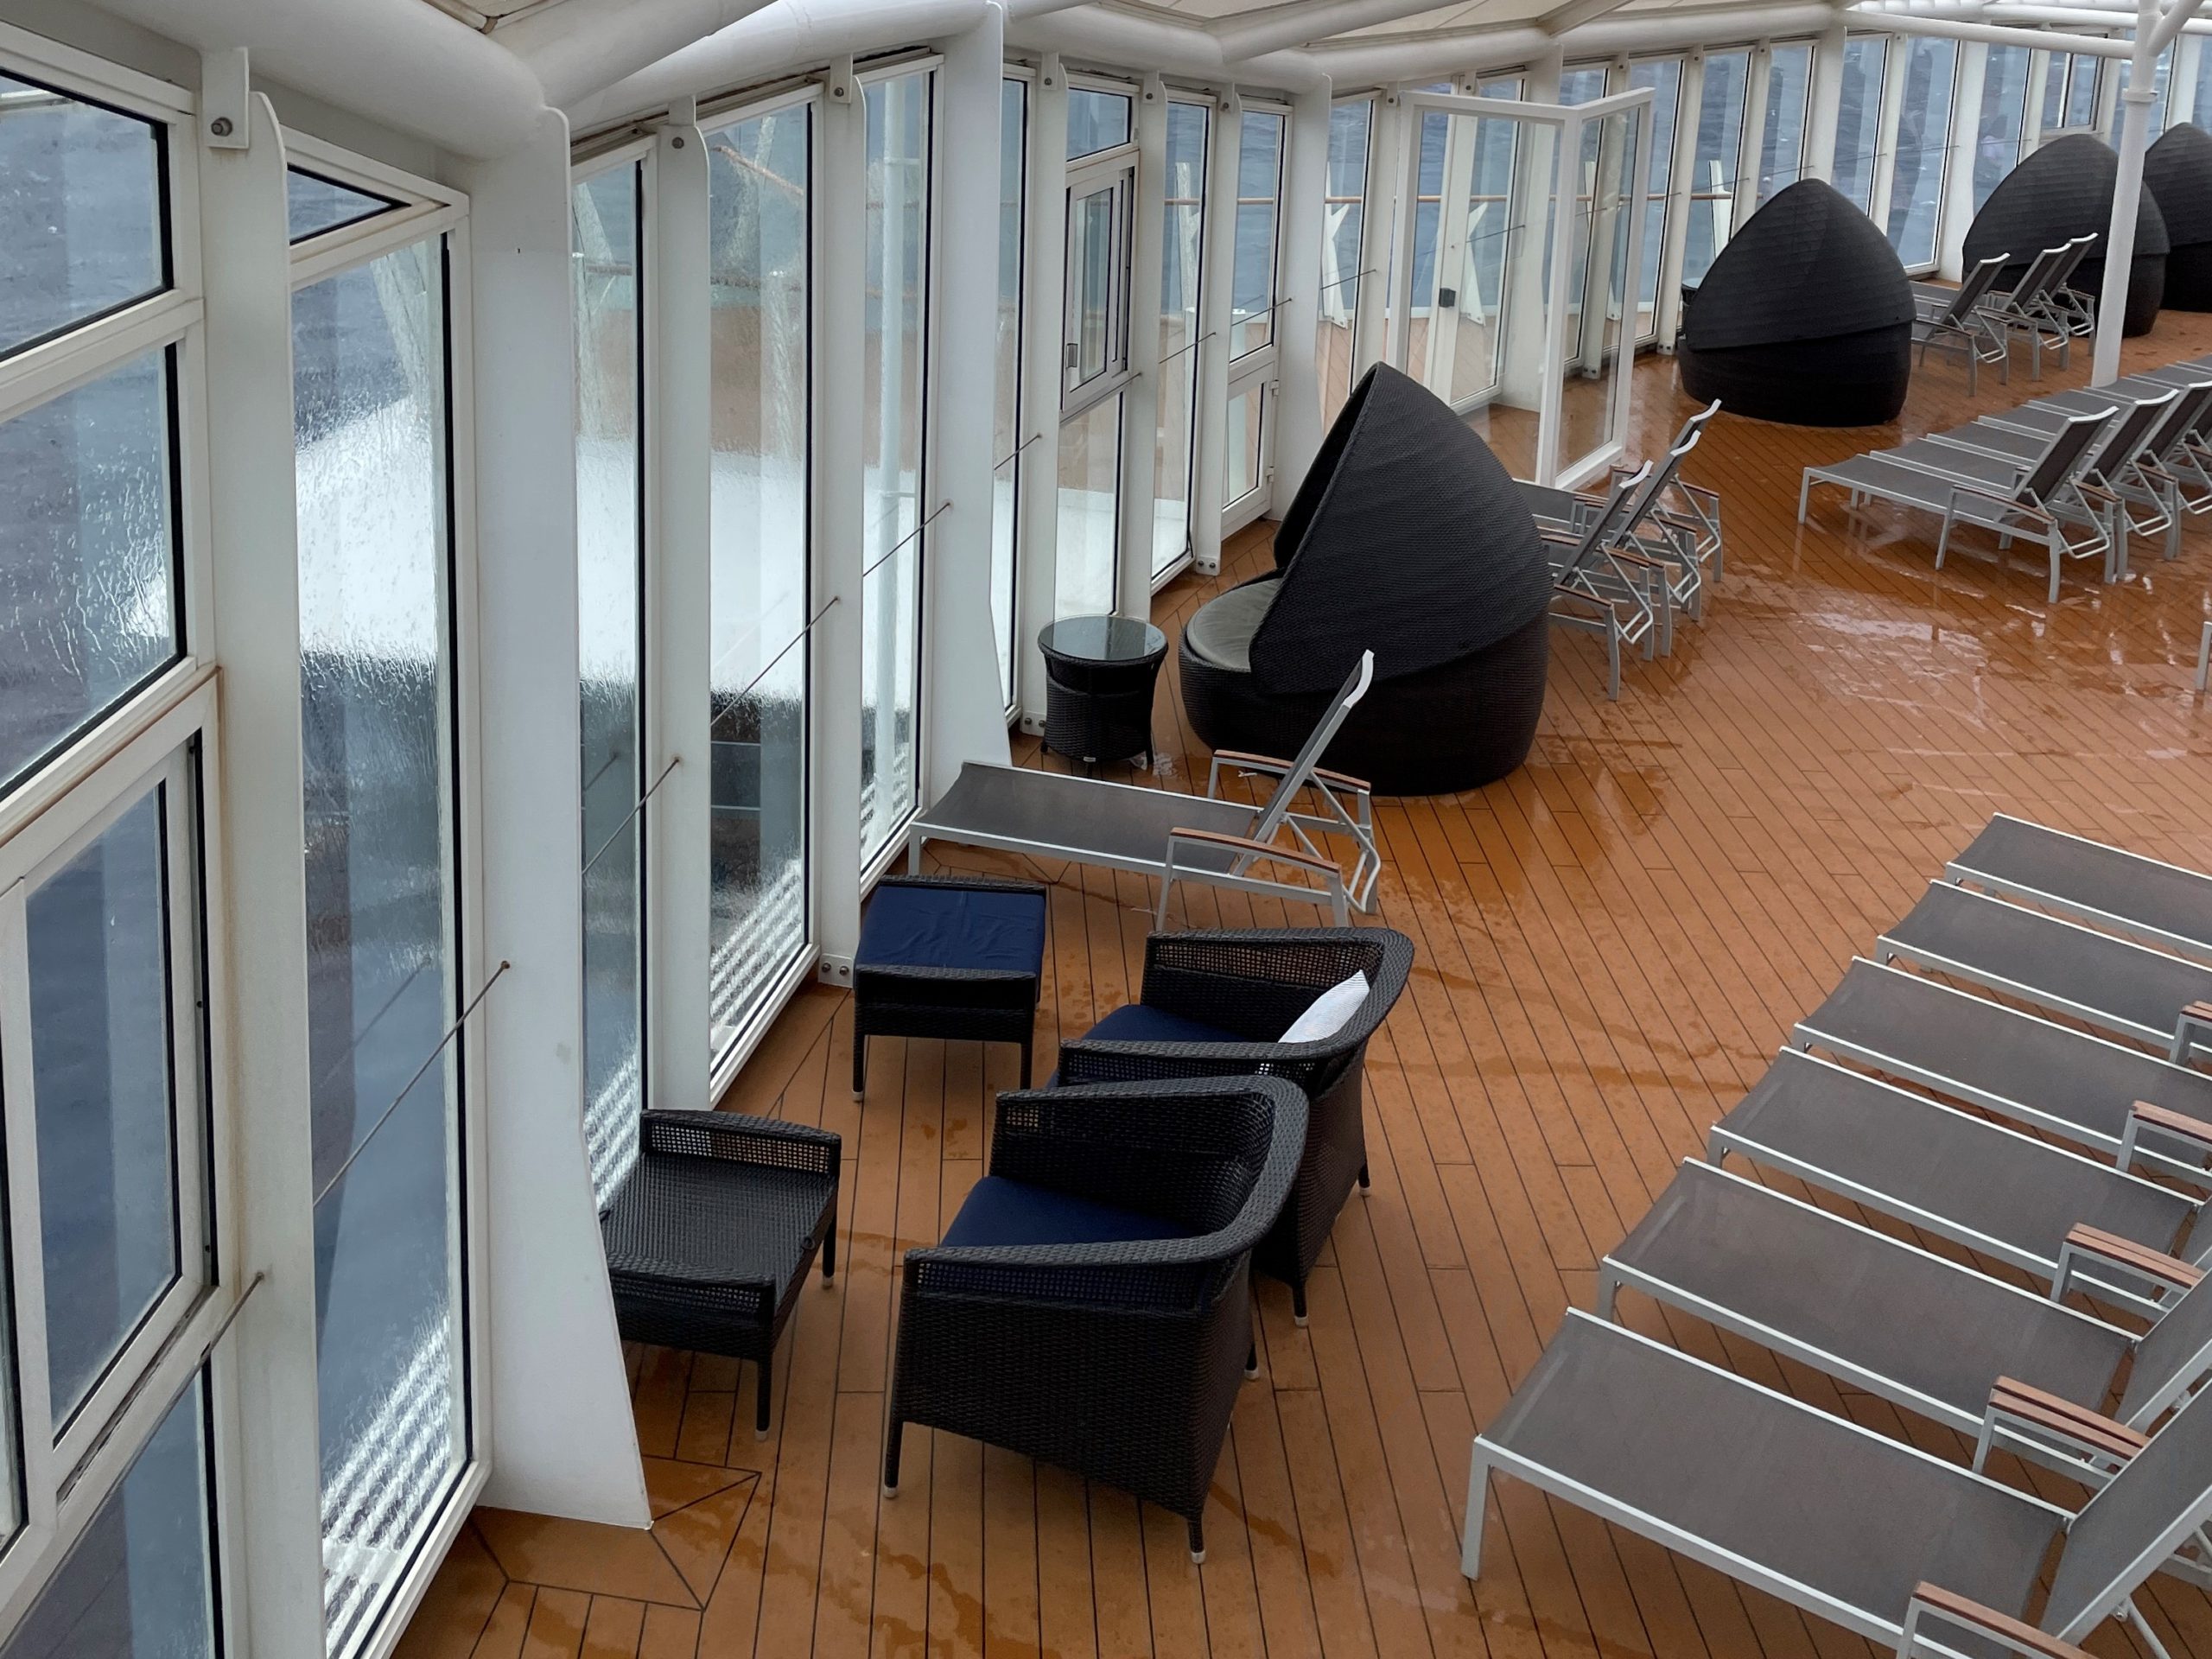 Main decks are included in the price of a royal caribbean cruise 